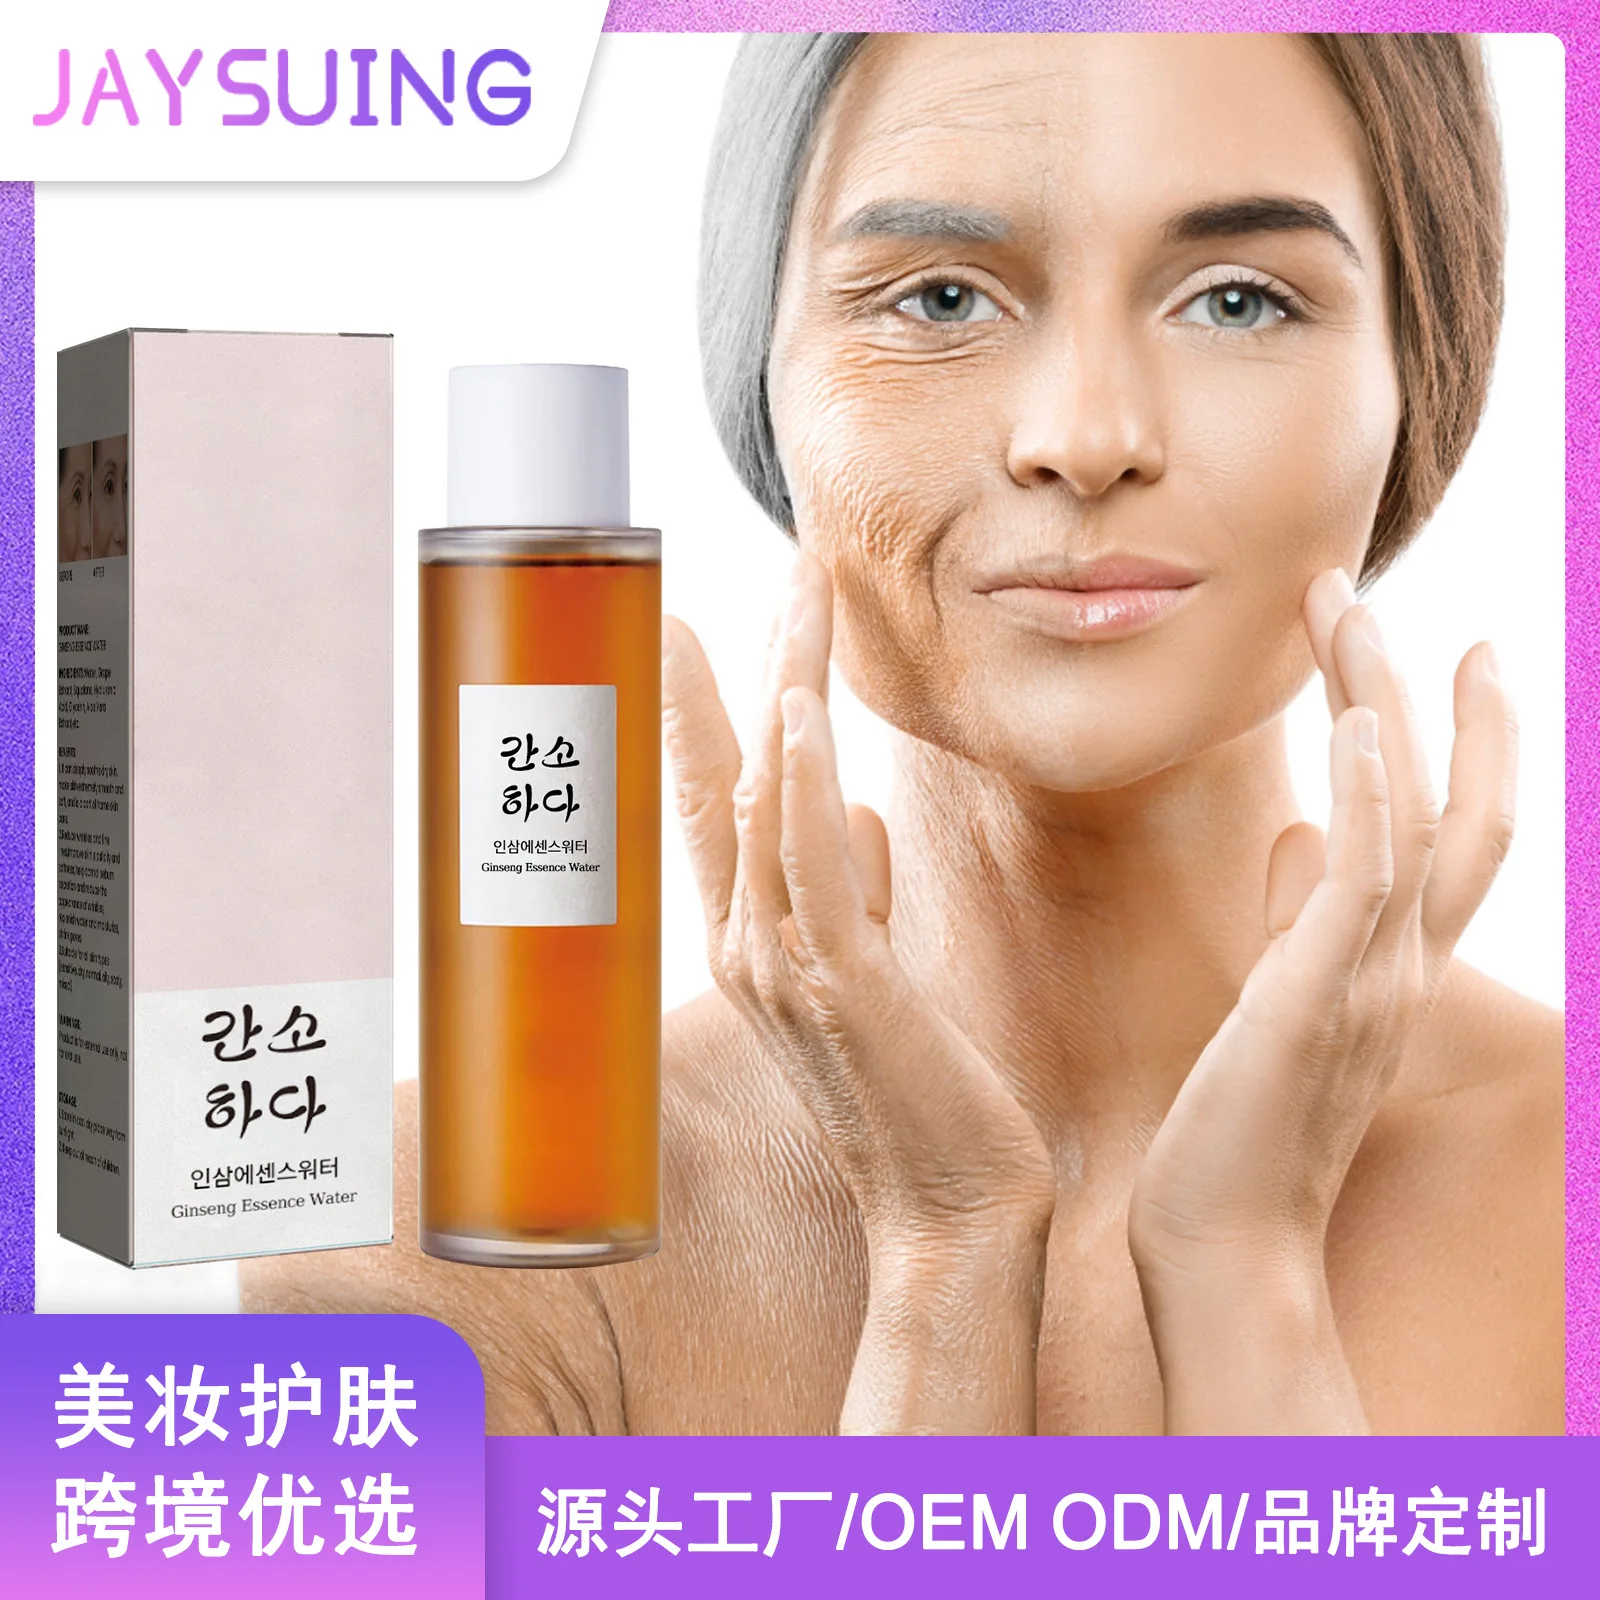 Ginseng essence water moisturizes skin tightens face reduces fine lines and moisturizes essence wate fy xf300h fy xf300 xf 300 fy 300 fy300 wate cooling plasma cutting torch consumables 10pcs 300100 electrode